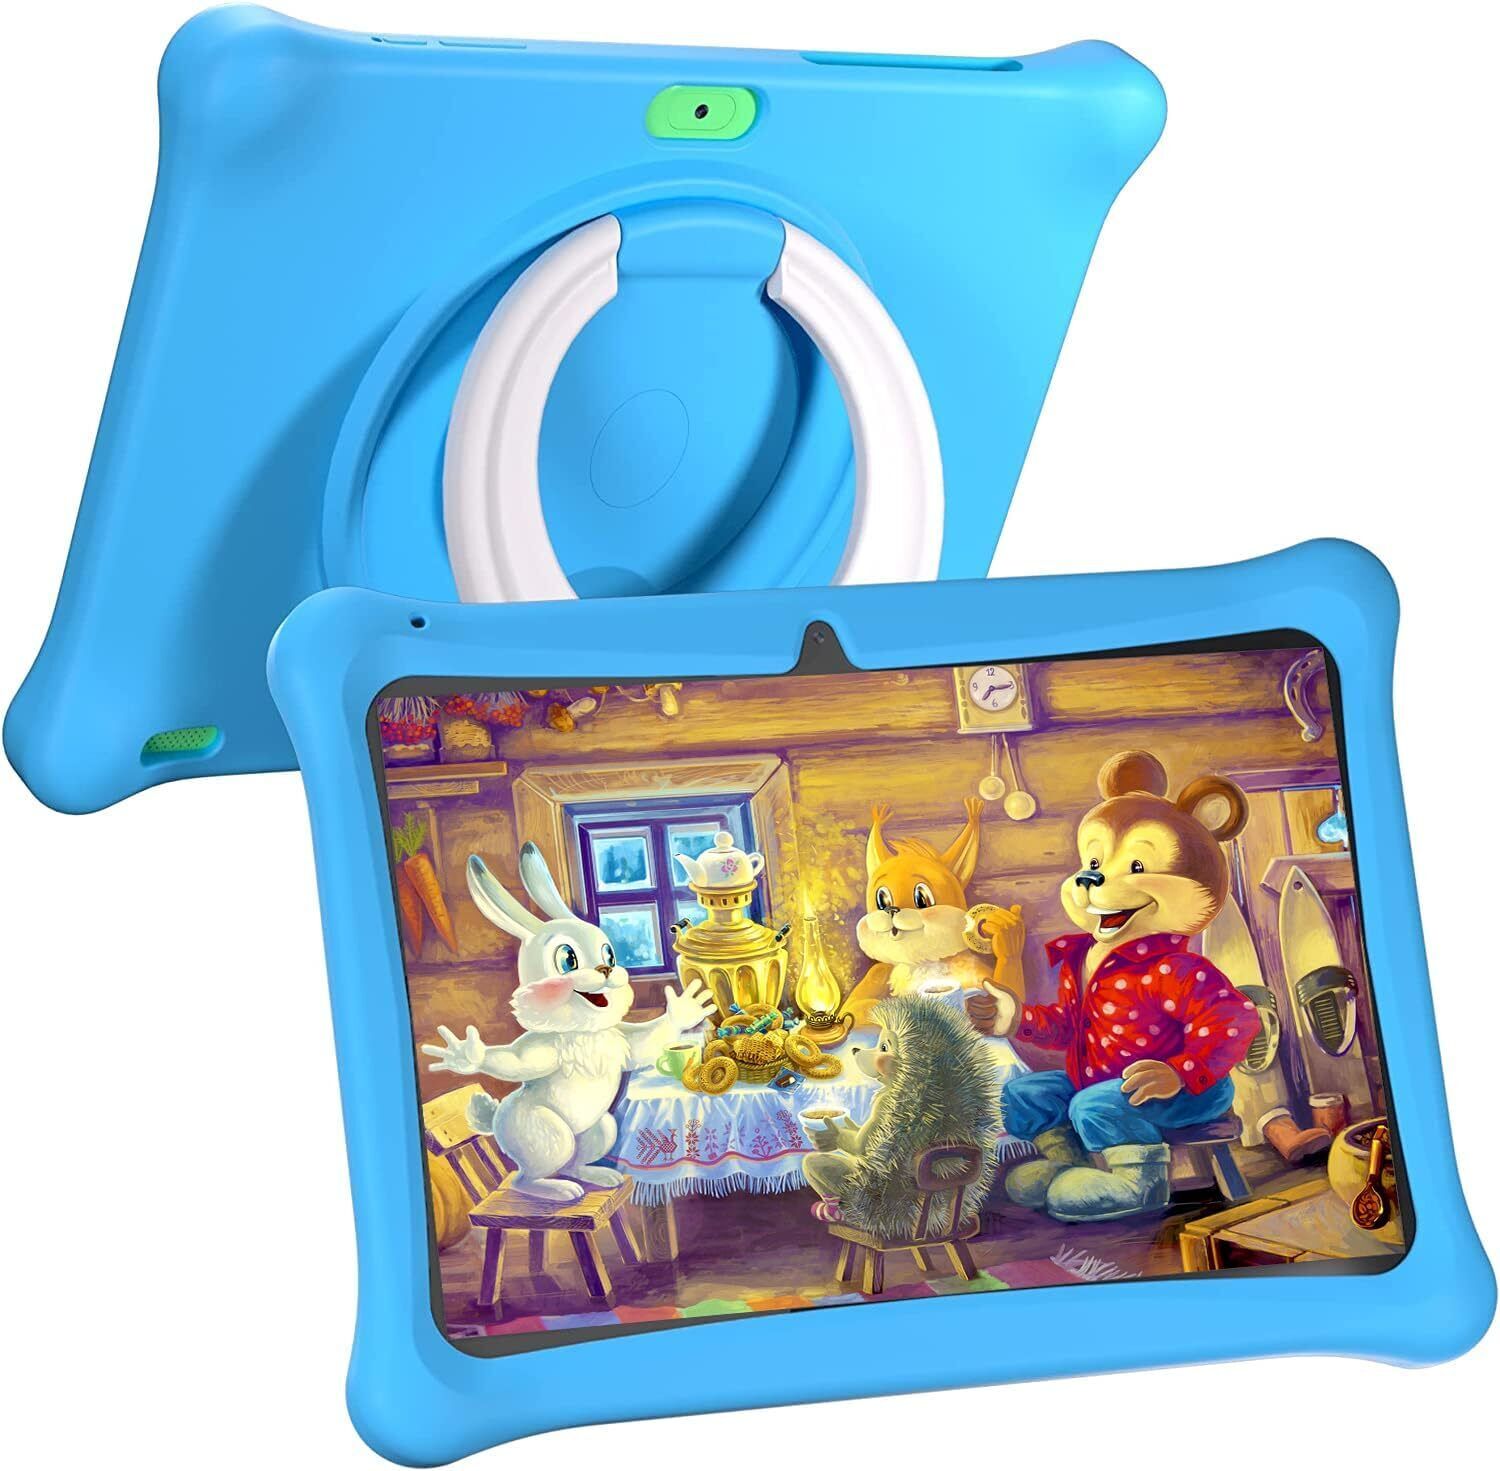 Kids Tablet 10 inch Android Tablet for Kids 32GB with BT WiFi Parental Control